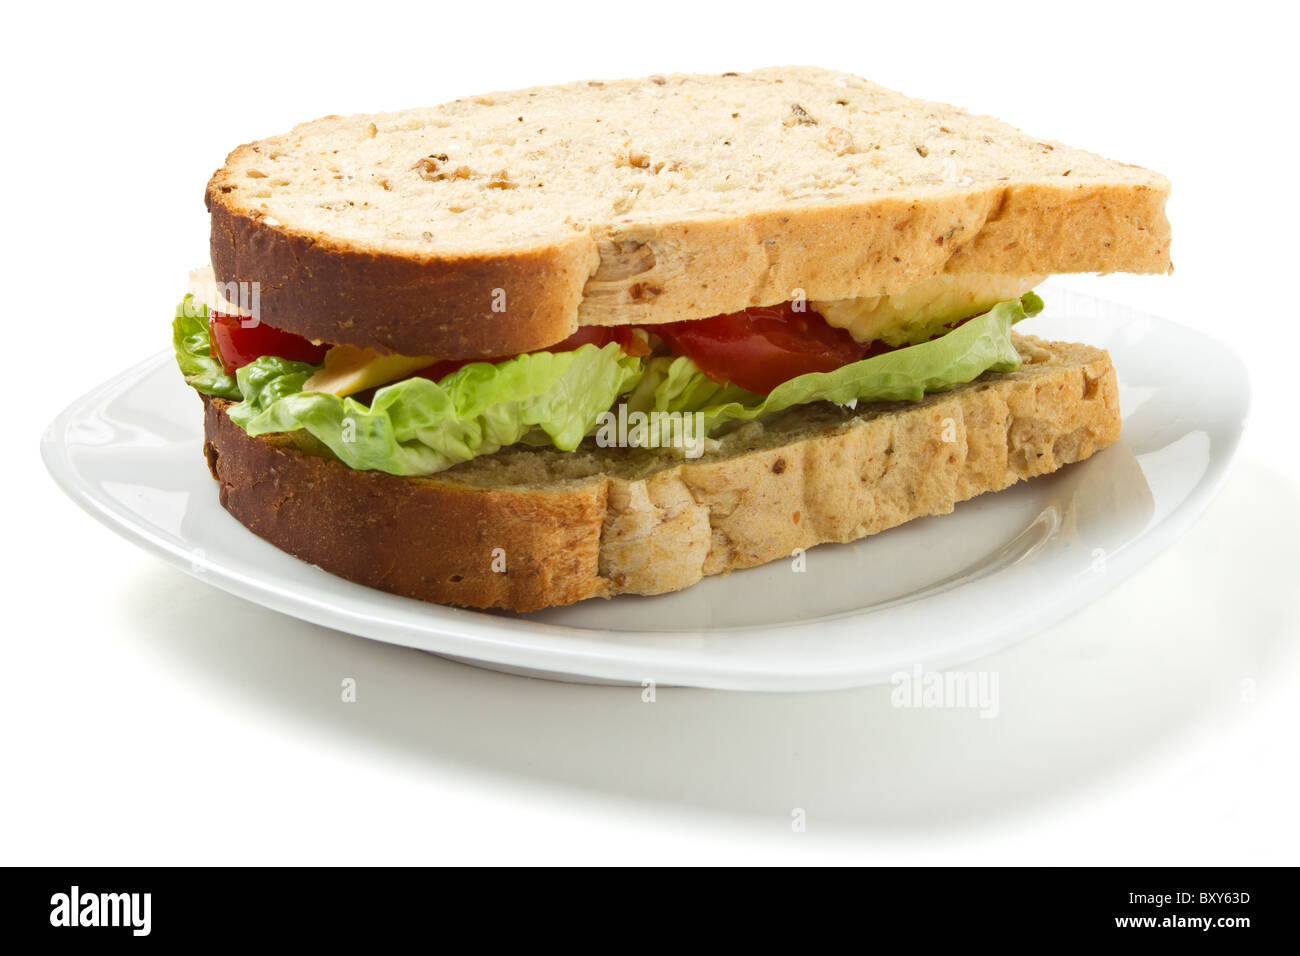 Vegetarian Sandwich of cheese, tomato and lettuce on brown Granary bread. Stock Photo